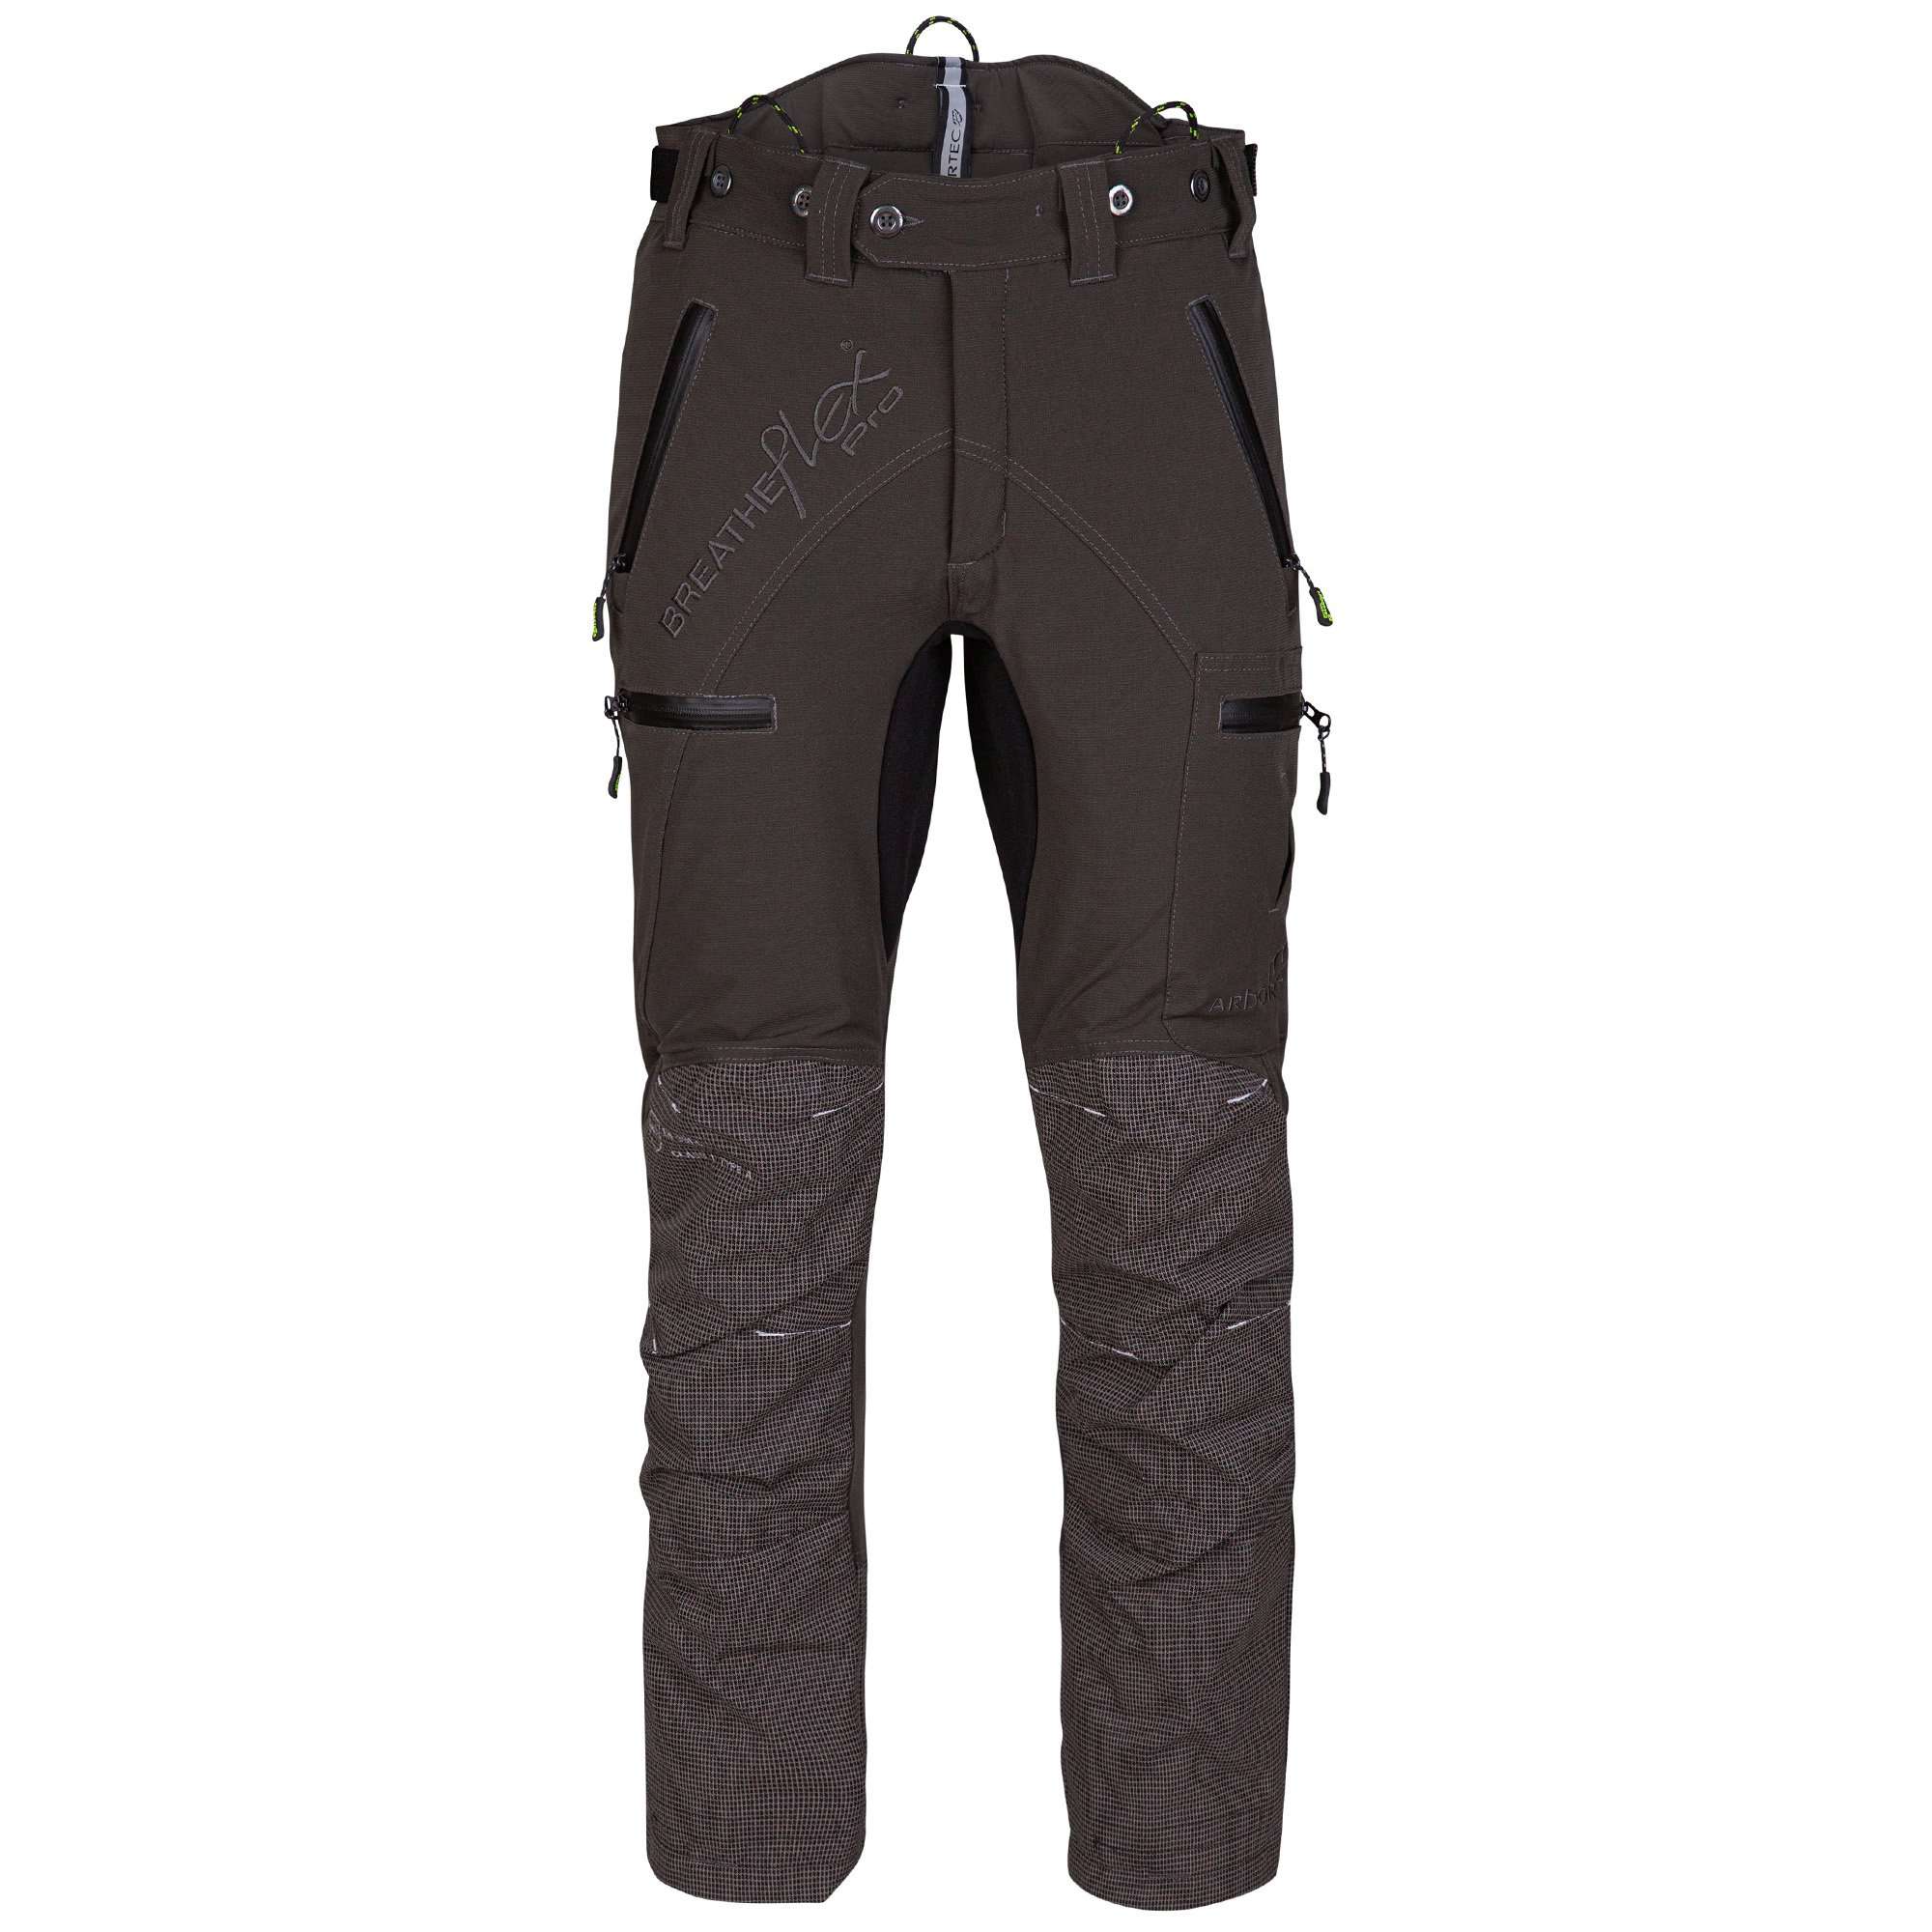 AT4070 Breatheflex Pro Type C Class 1 Chainsaw Trousers - Olive - Arbortec Forestwear